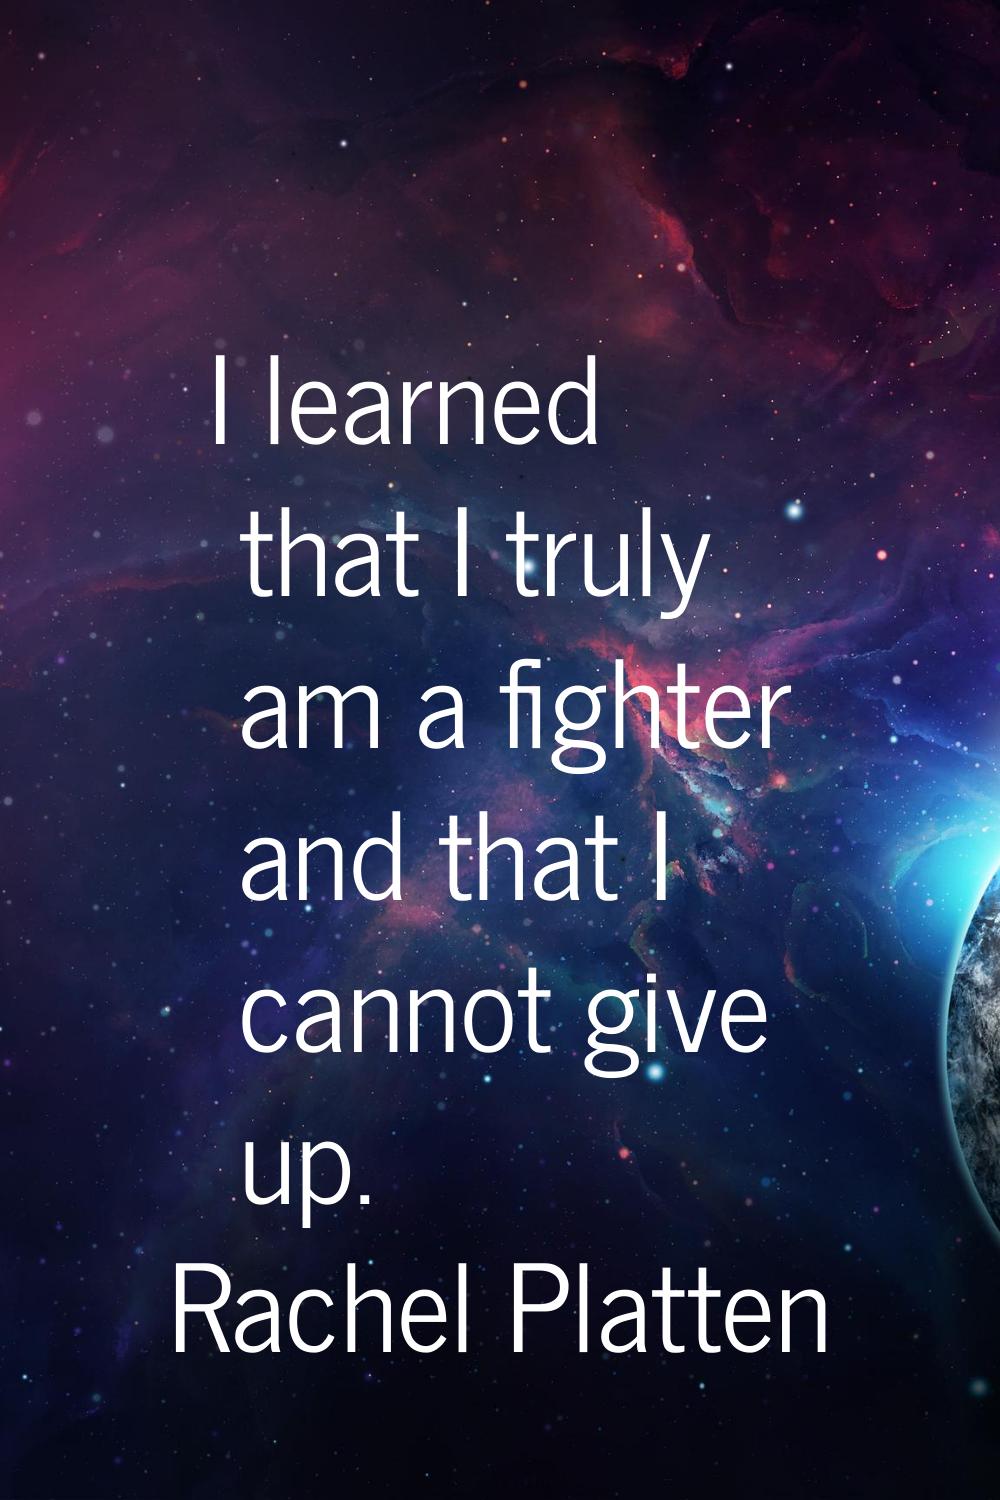 I learned that I truly am a fighter and that I cannot give up.